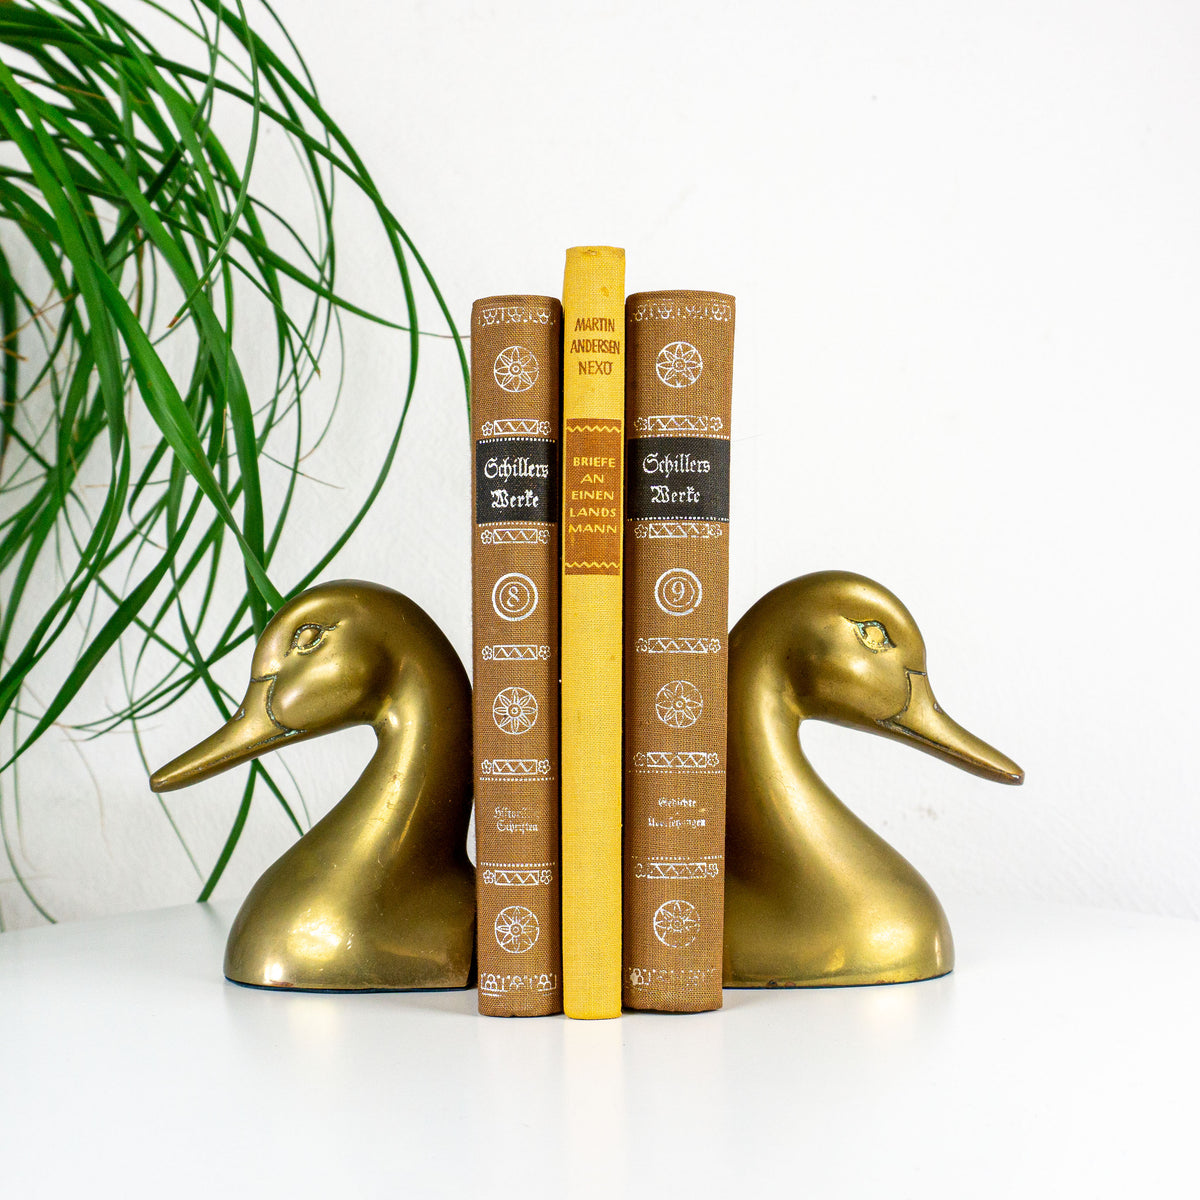 XLarge pair of brass duck head bookends. I've always wanted to find a pair  in the larger size and haven't had any luck until now. They are…